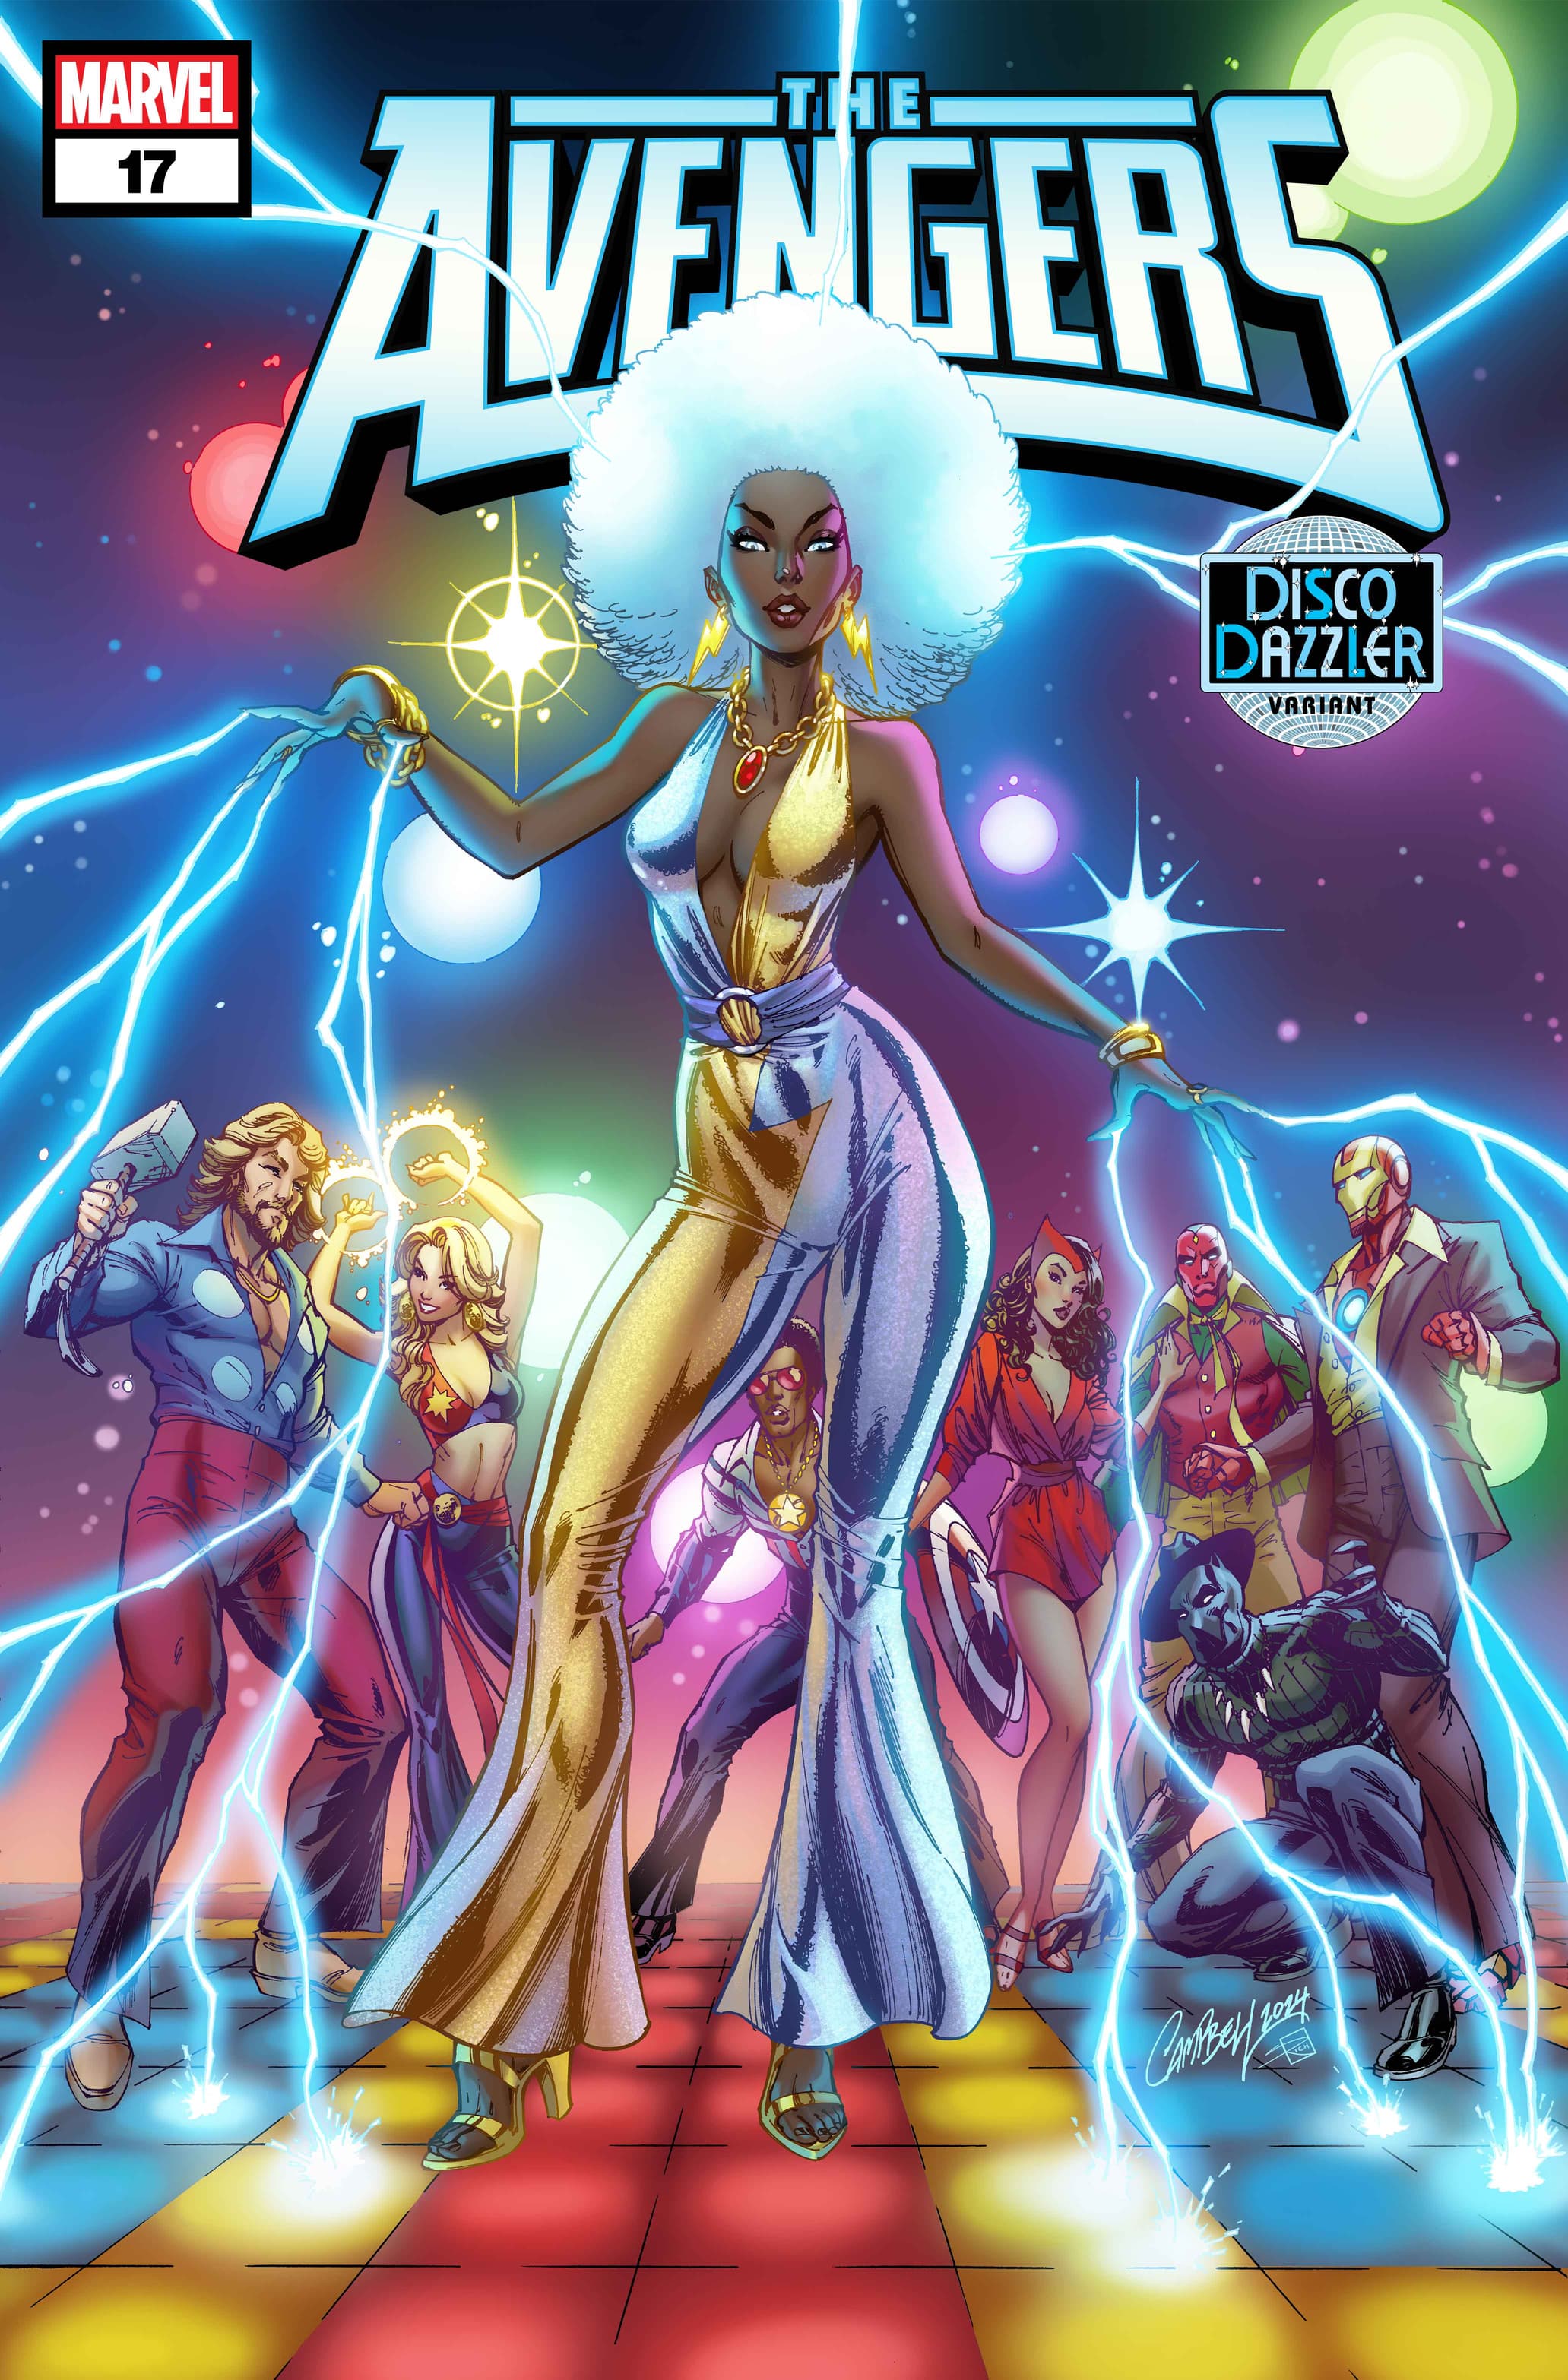 AVENGERS #17 Disco Dazzler Variant Cover by J. Scott Campbell